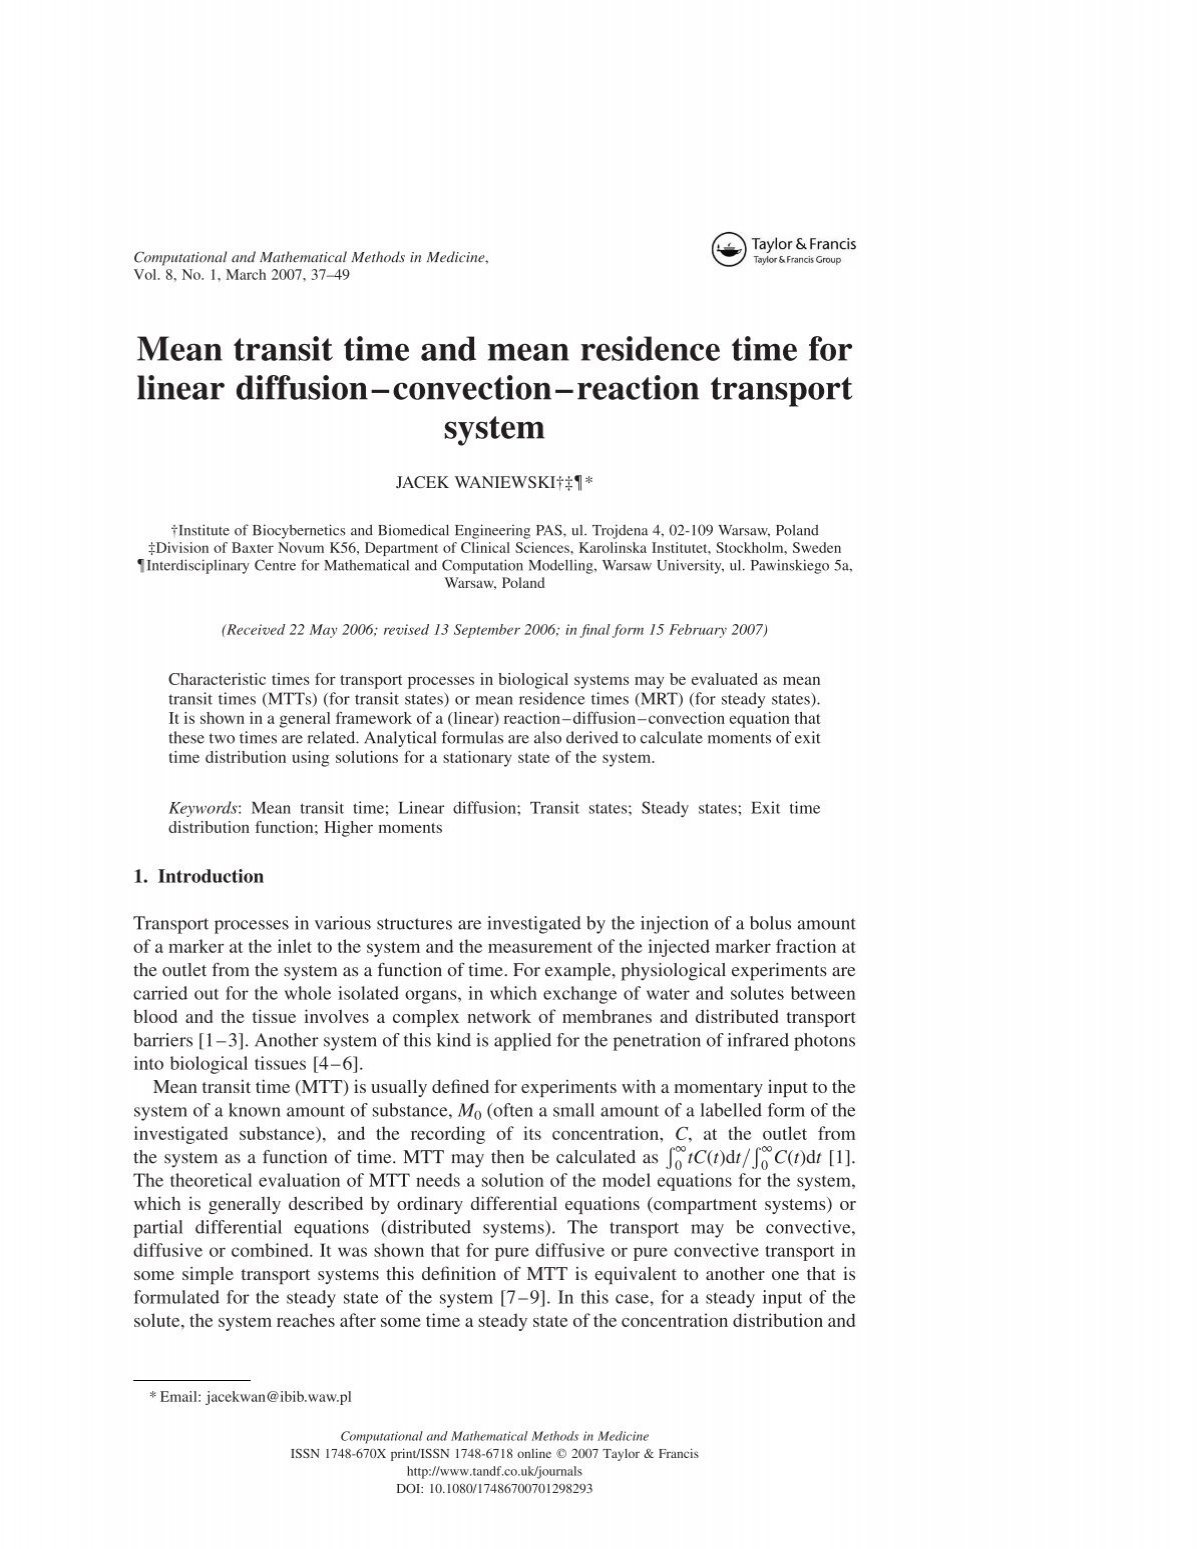 Mean Transit Time And Mean Residence Time For Linear Diffusion